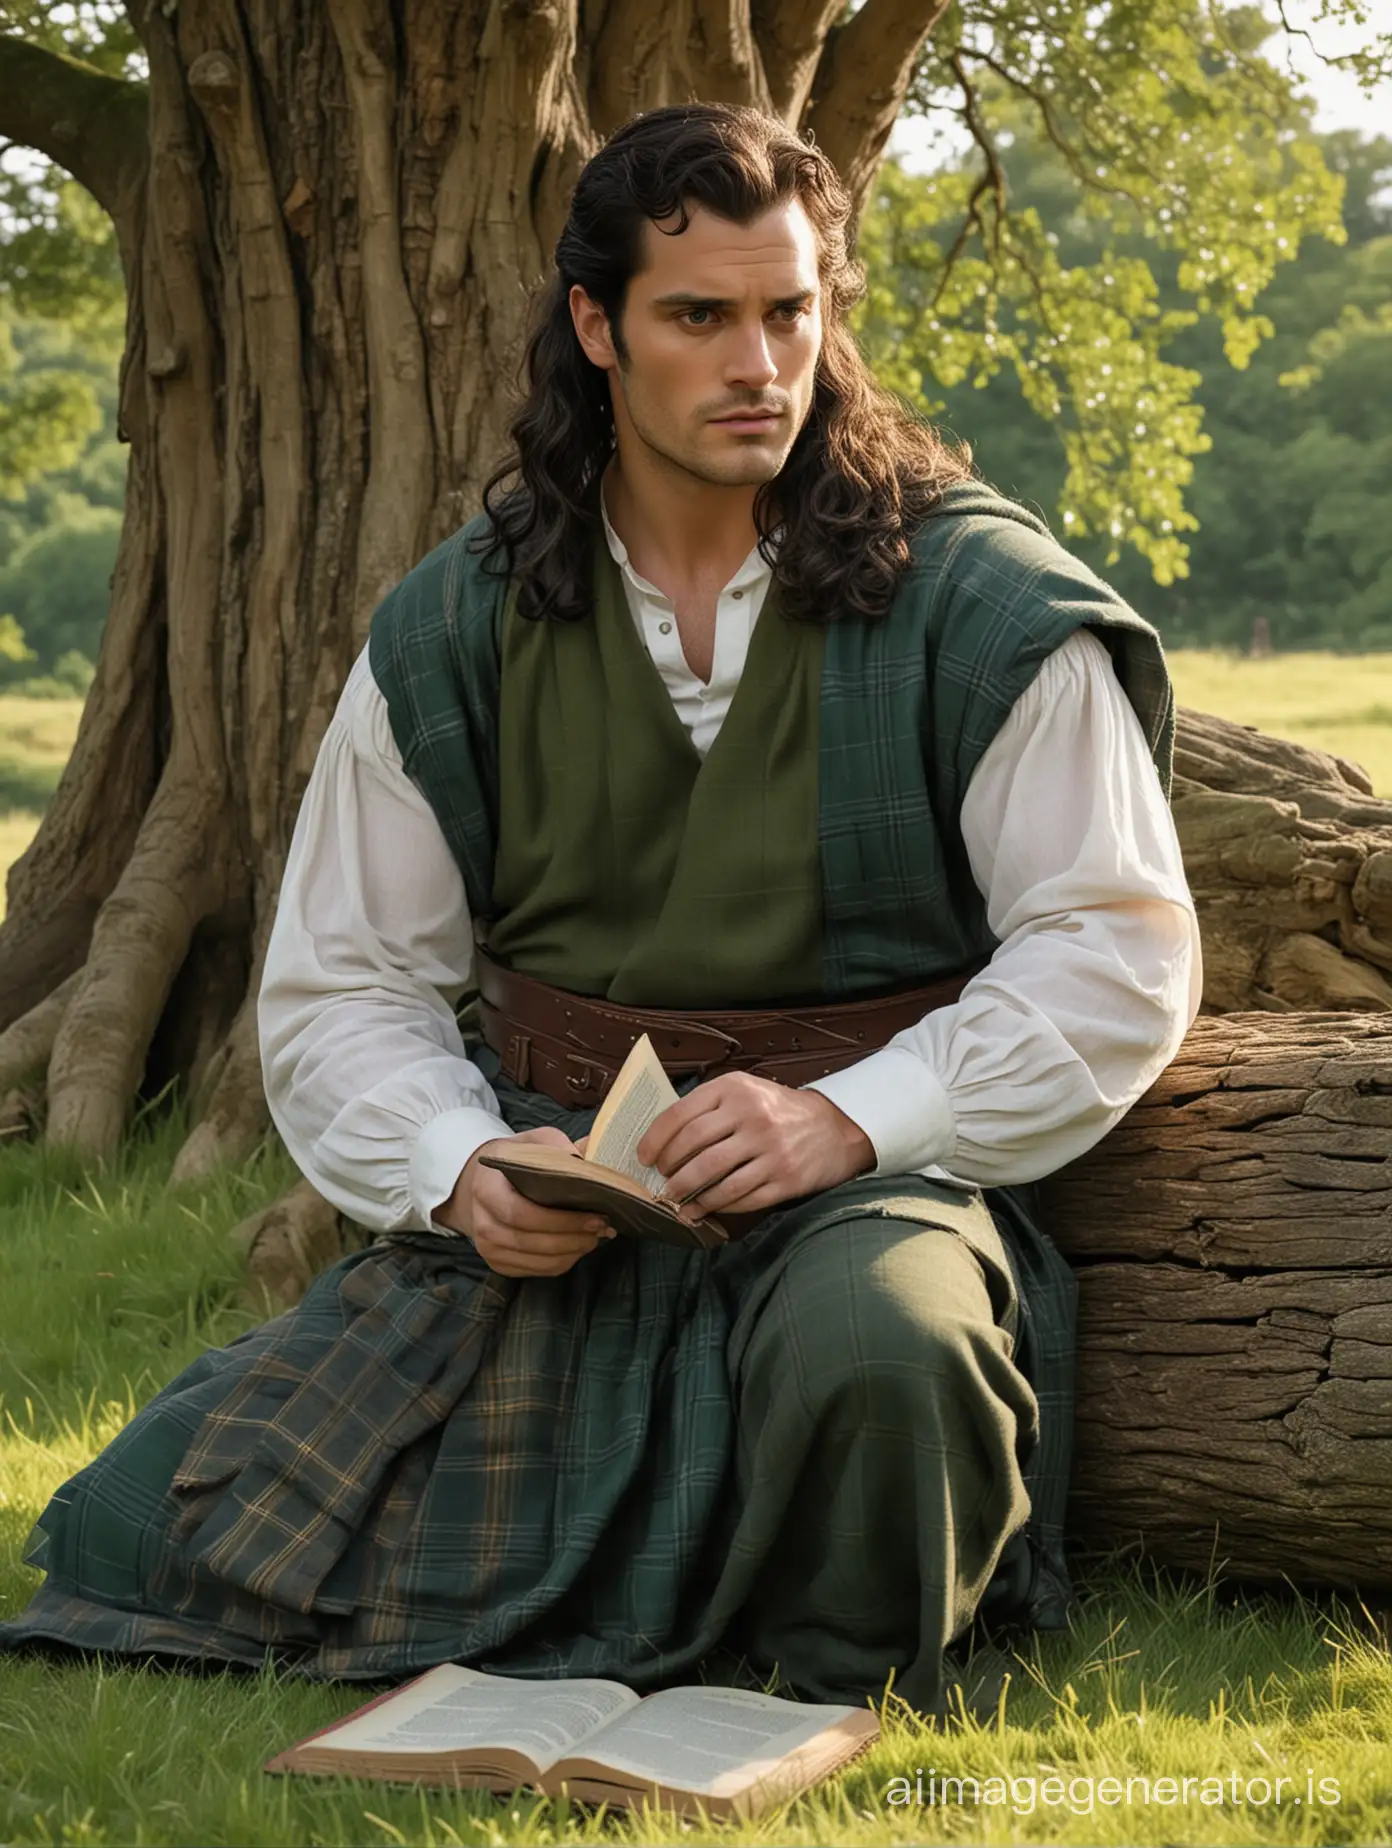 A Renaissance Highlander who looks like Henry Cavill, long black hair loose over the shoulders with a single braid on one side of the temple, dark eyes and melancholic expression, hyperrealistic sitting on the grass under a tree with his back against the log reading a book in Scotland during sunset dressed in a dark green kilt with grey squares